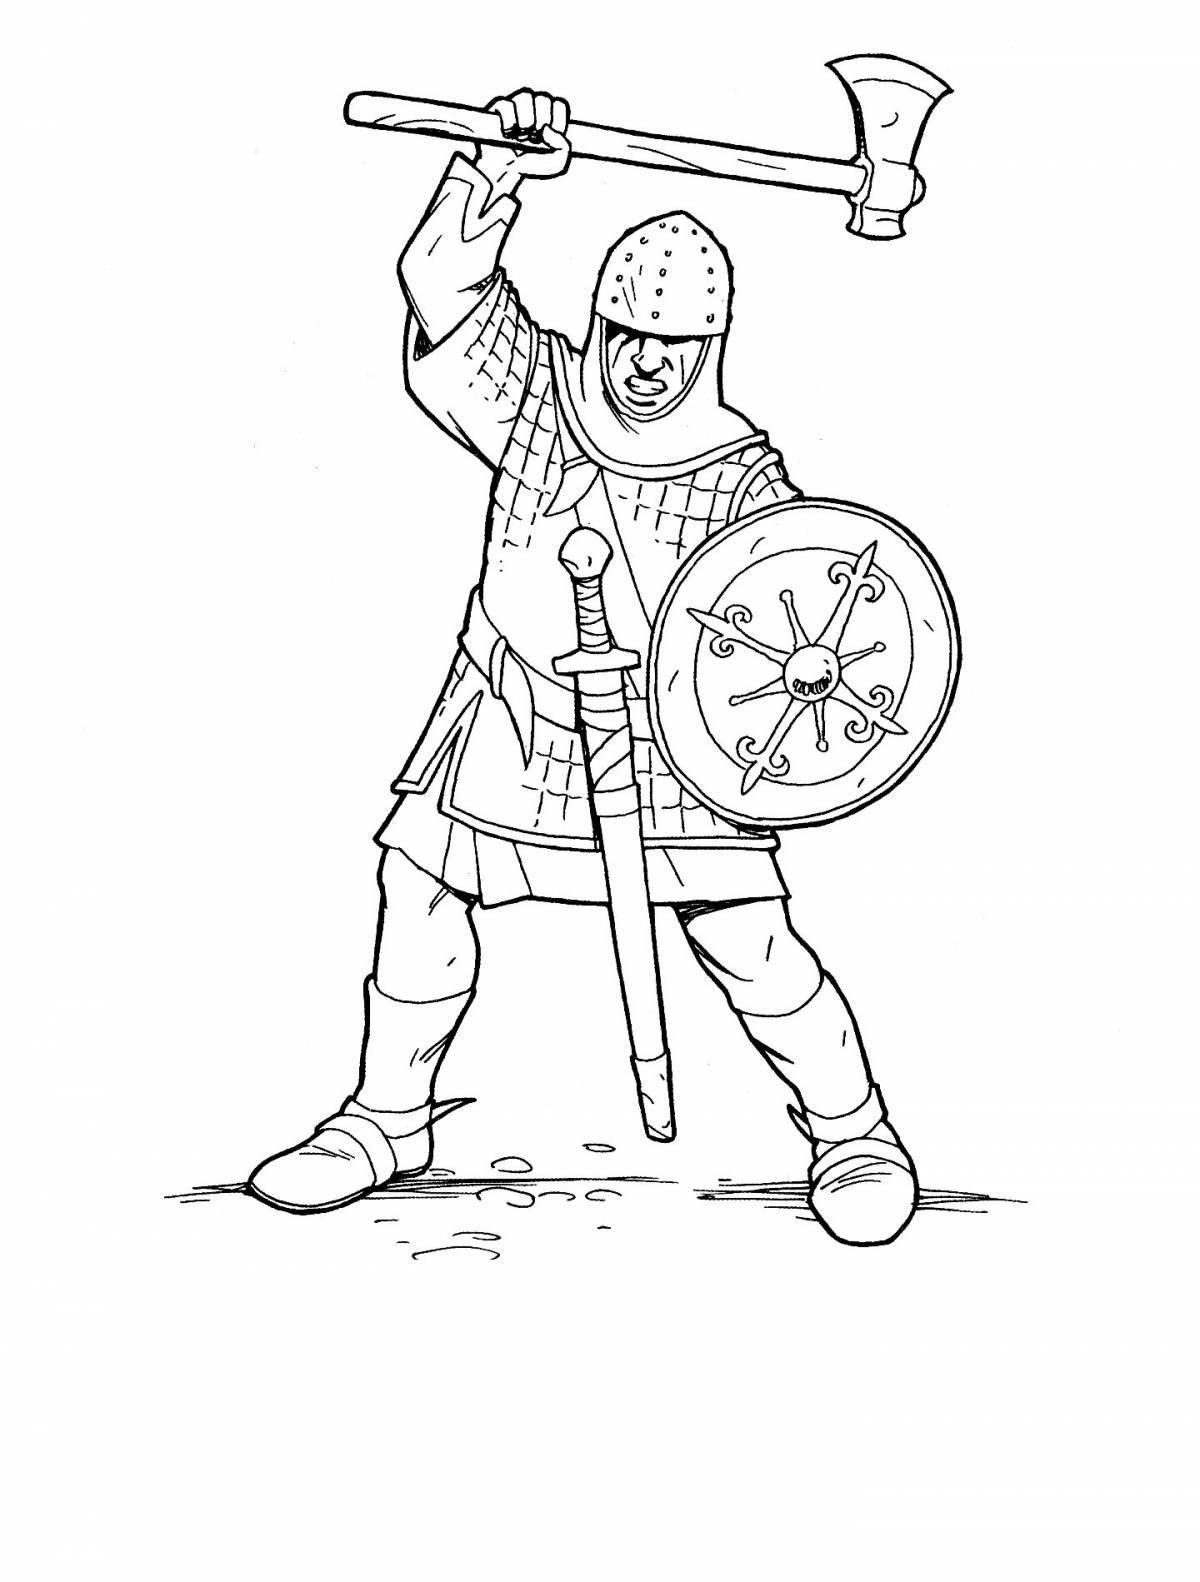 Courageous knight in armor coloring page